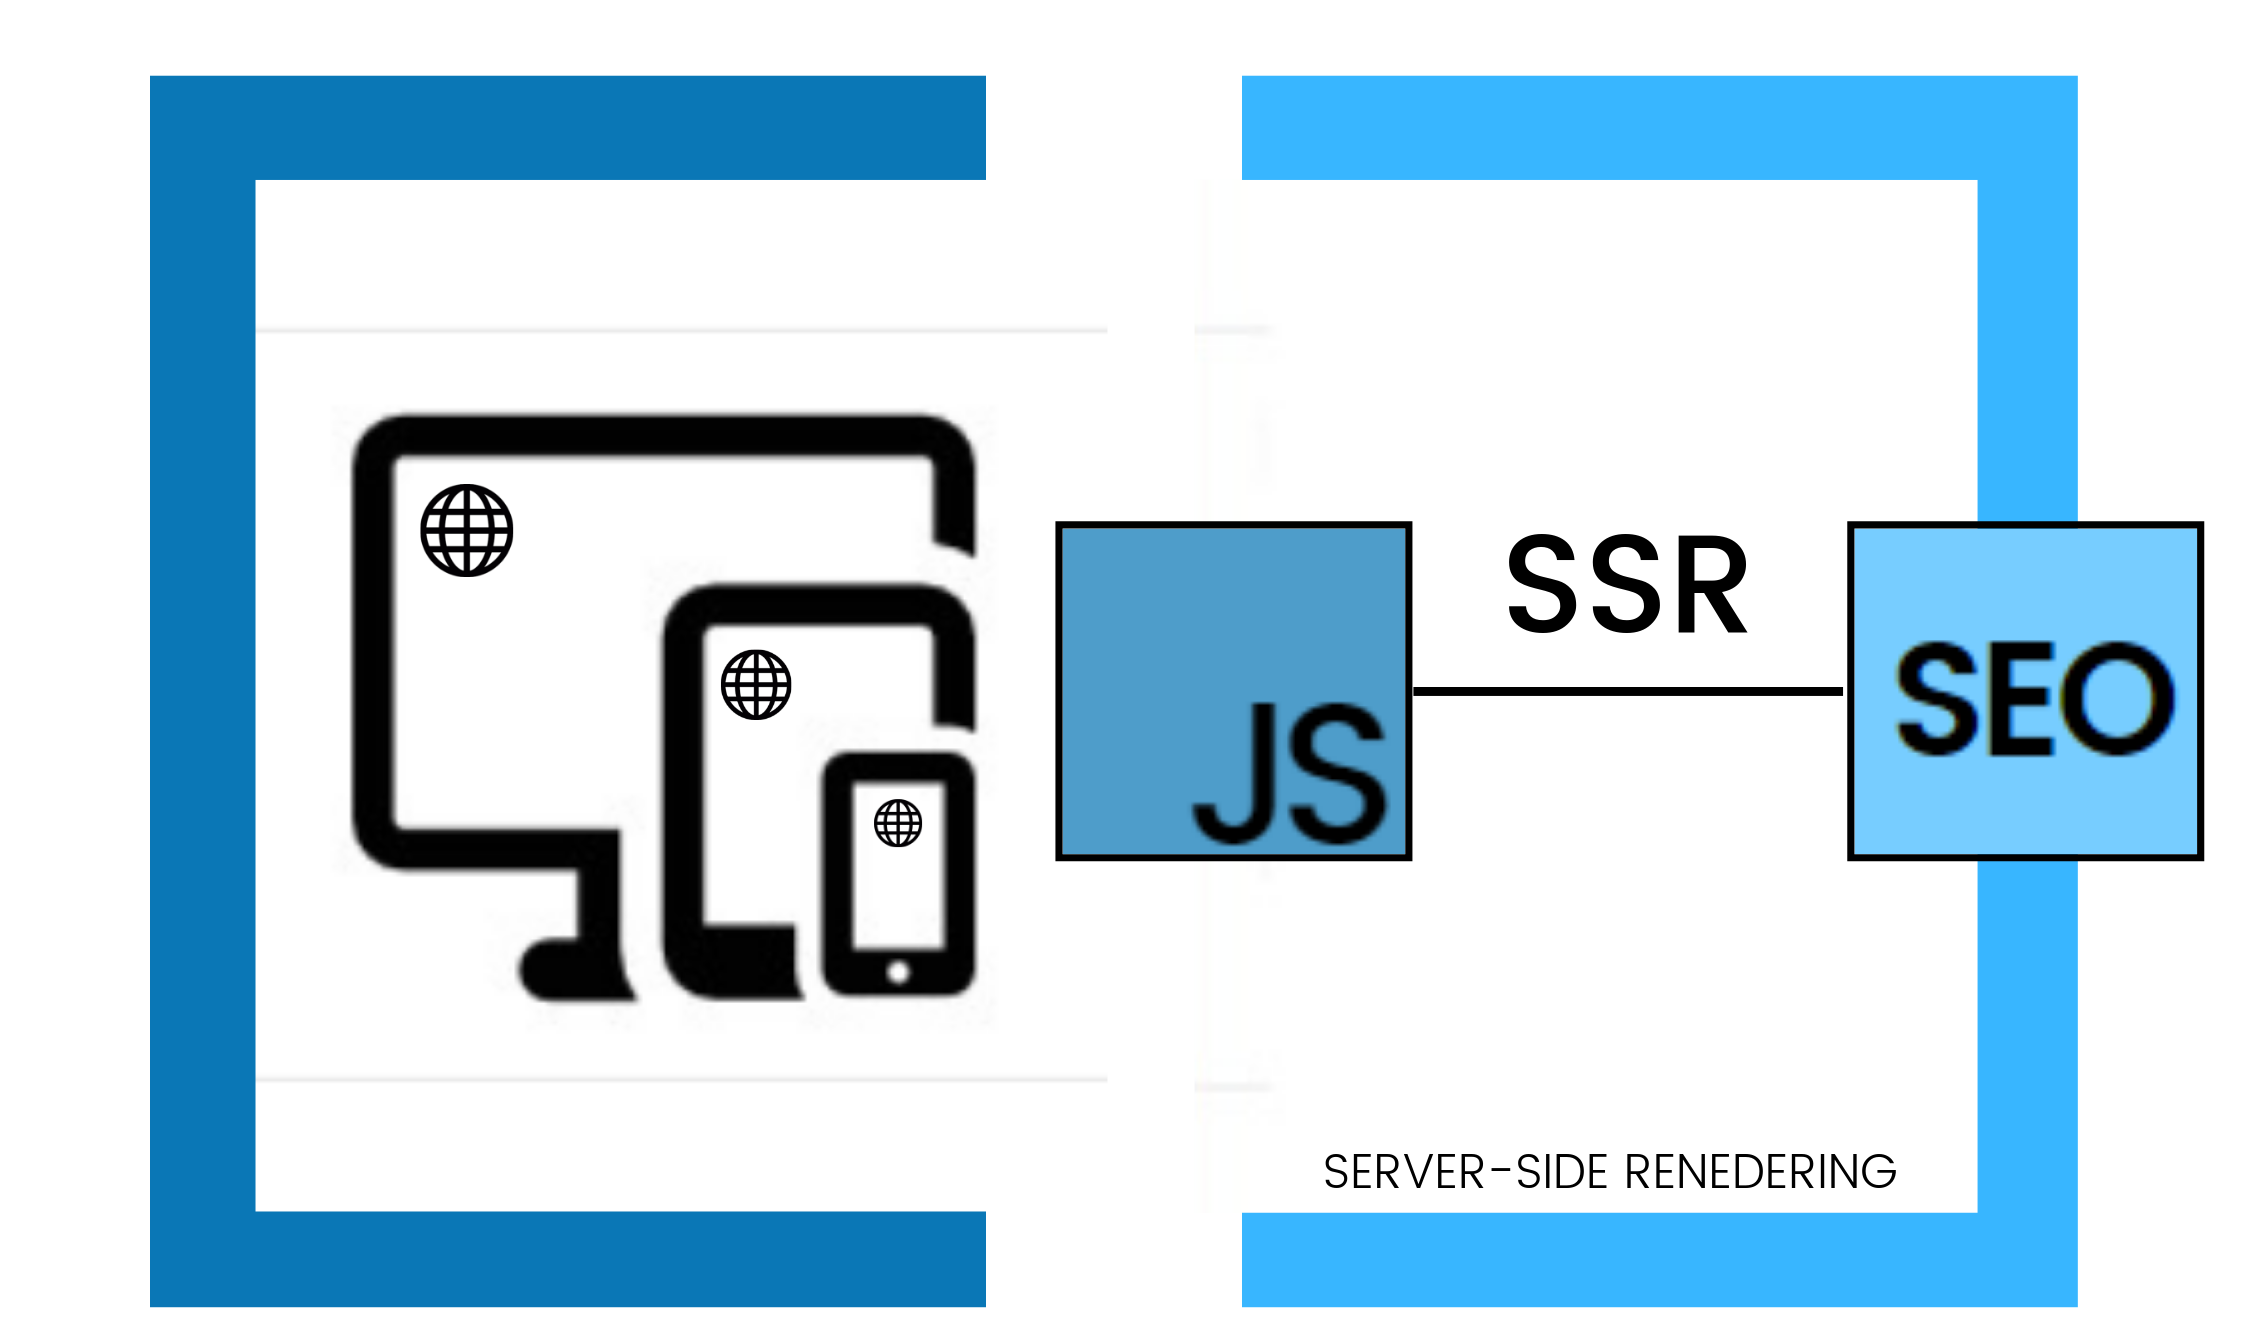 Server-side rendering and SEO